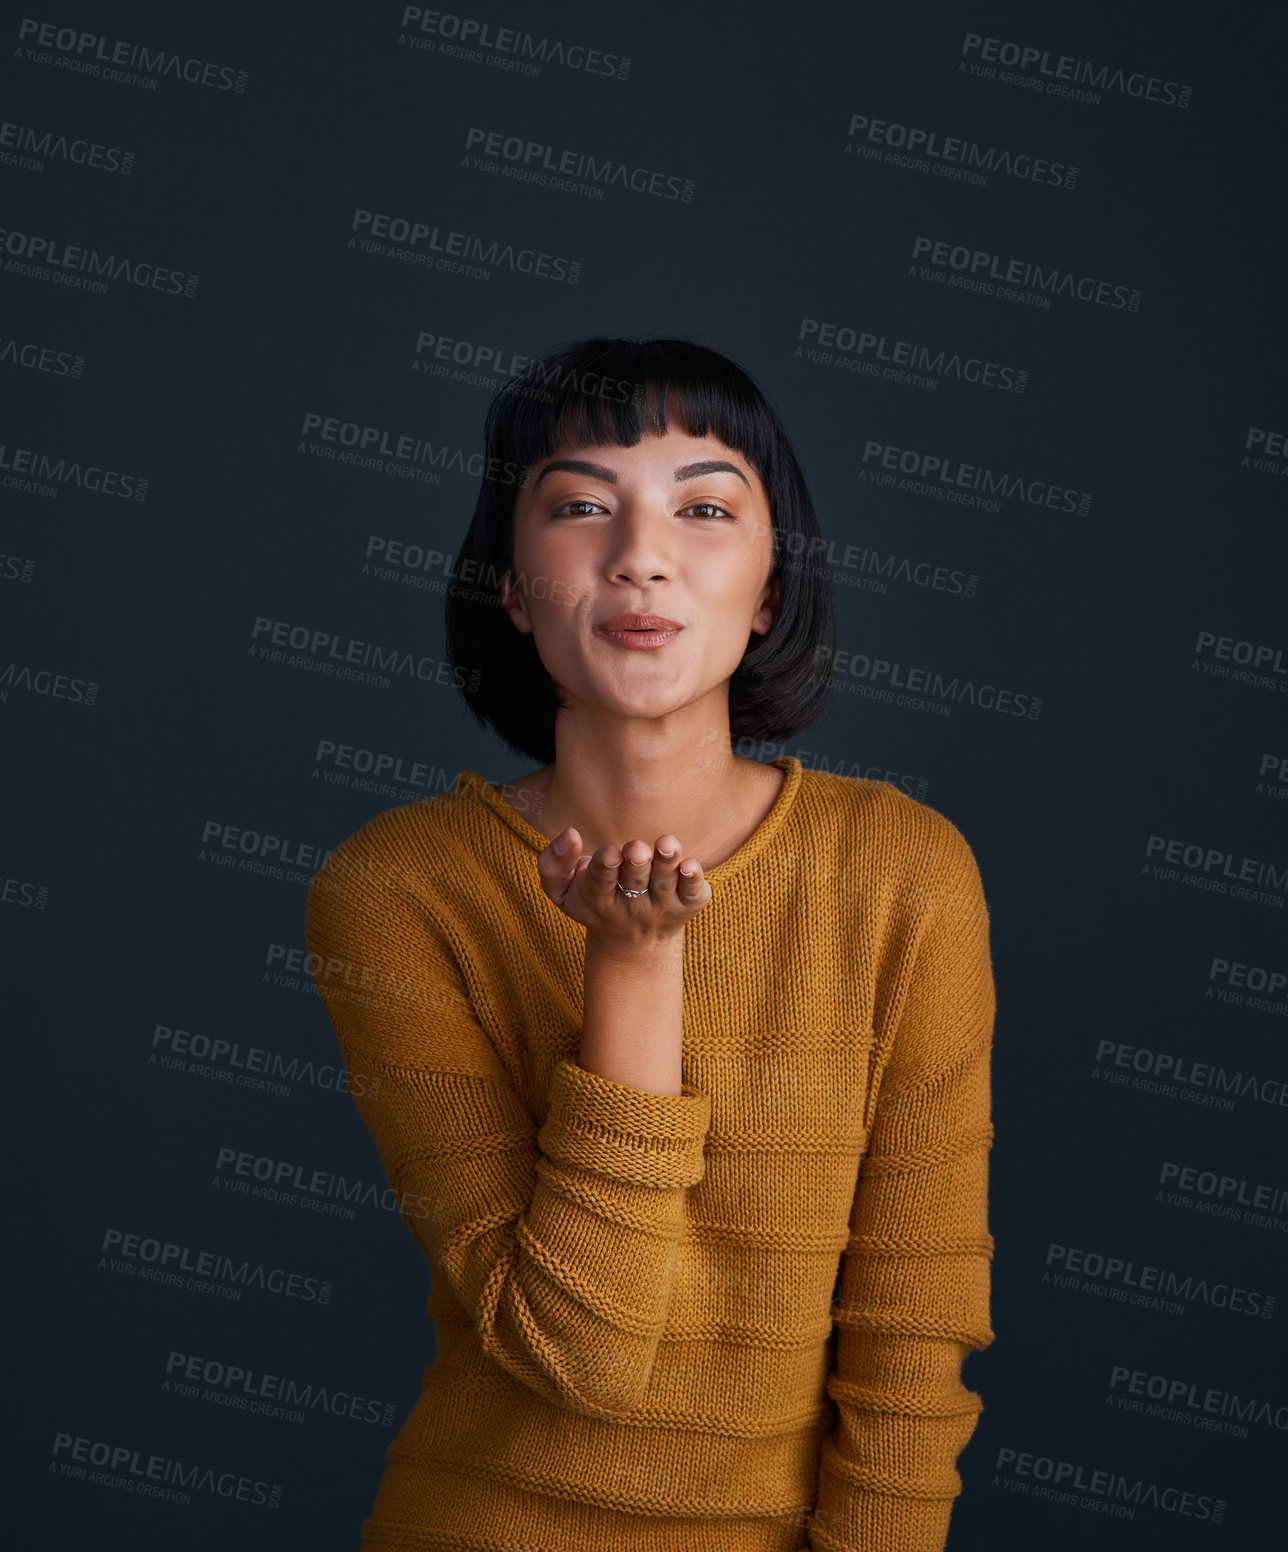 Buy stock photo Studio portrait of an attractive young woman blowing kisses against a dark background